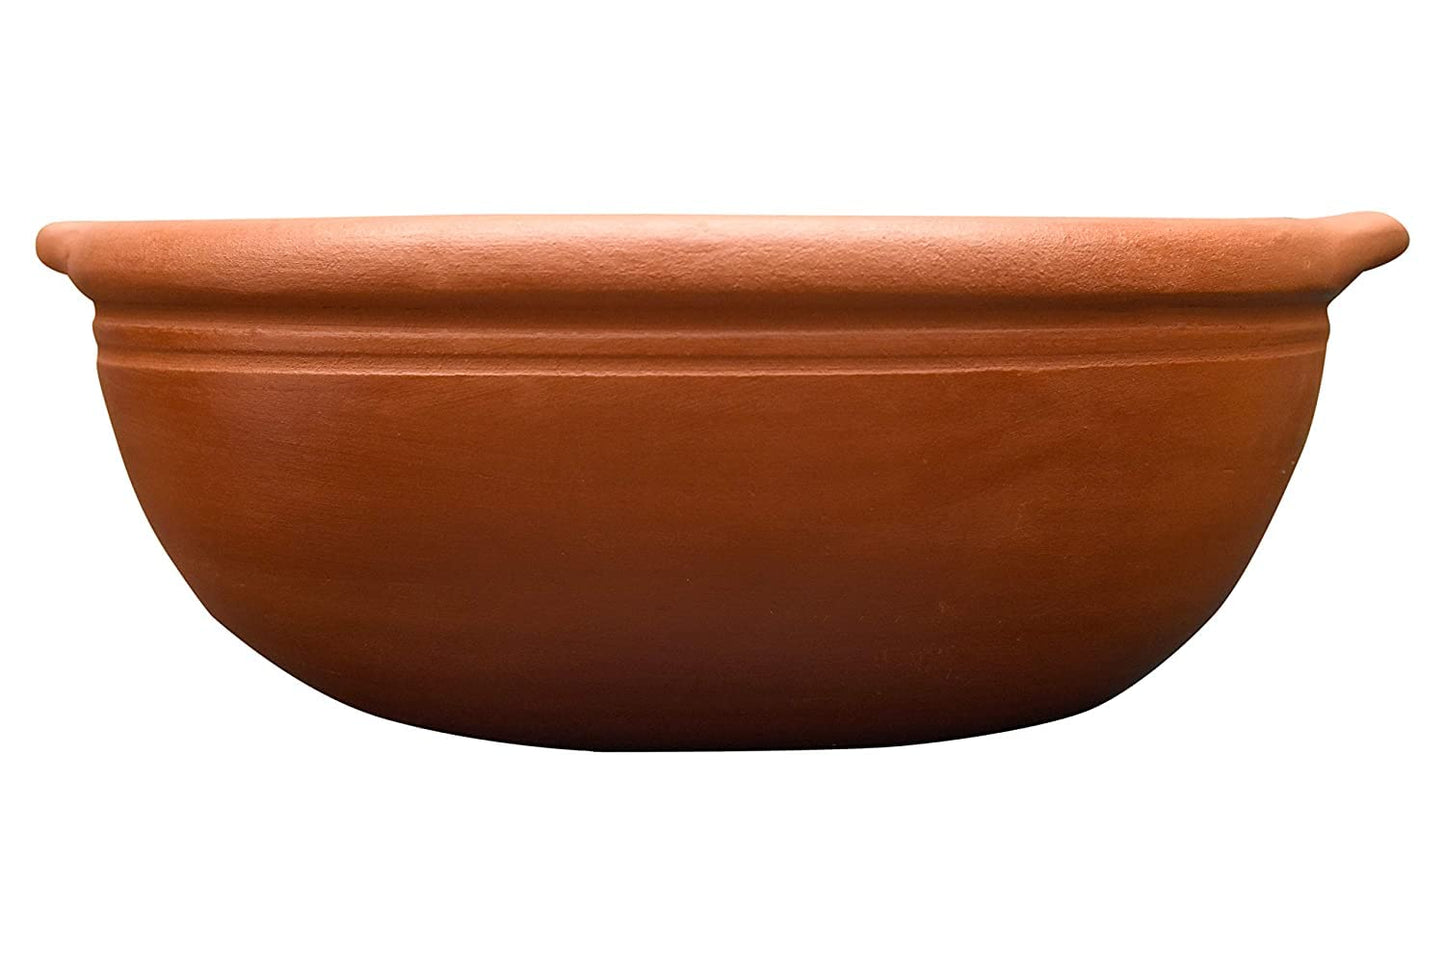 EZAHK Hand Made Clay Open Kadai/Pot for Curry Dal Cooking & Frying (Brown, 2 L)